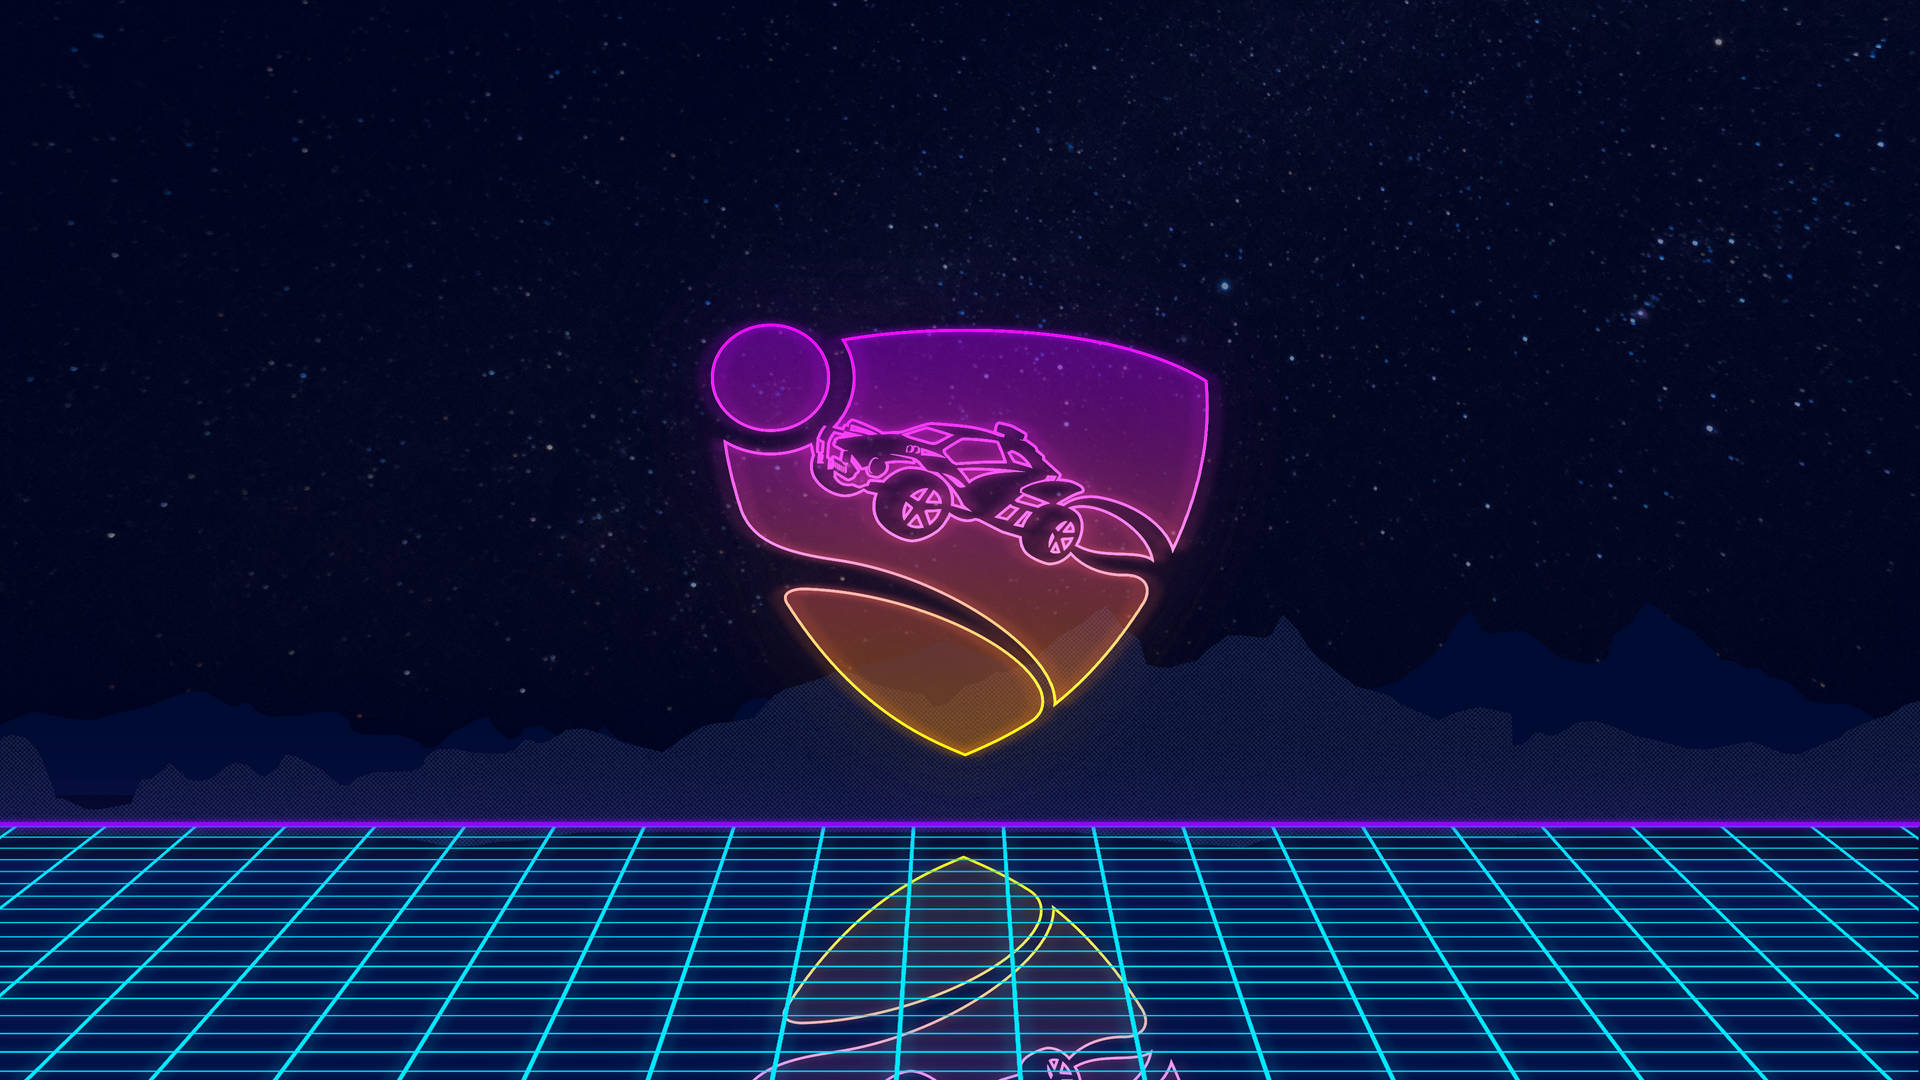 Quench Your Thirst For Ferocious Car Football With Rocket League! Wallpaper